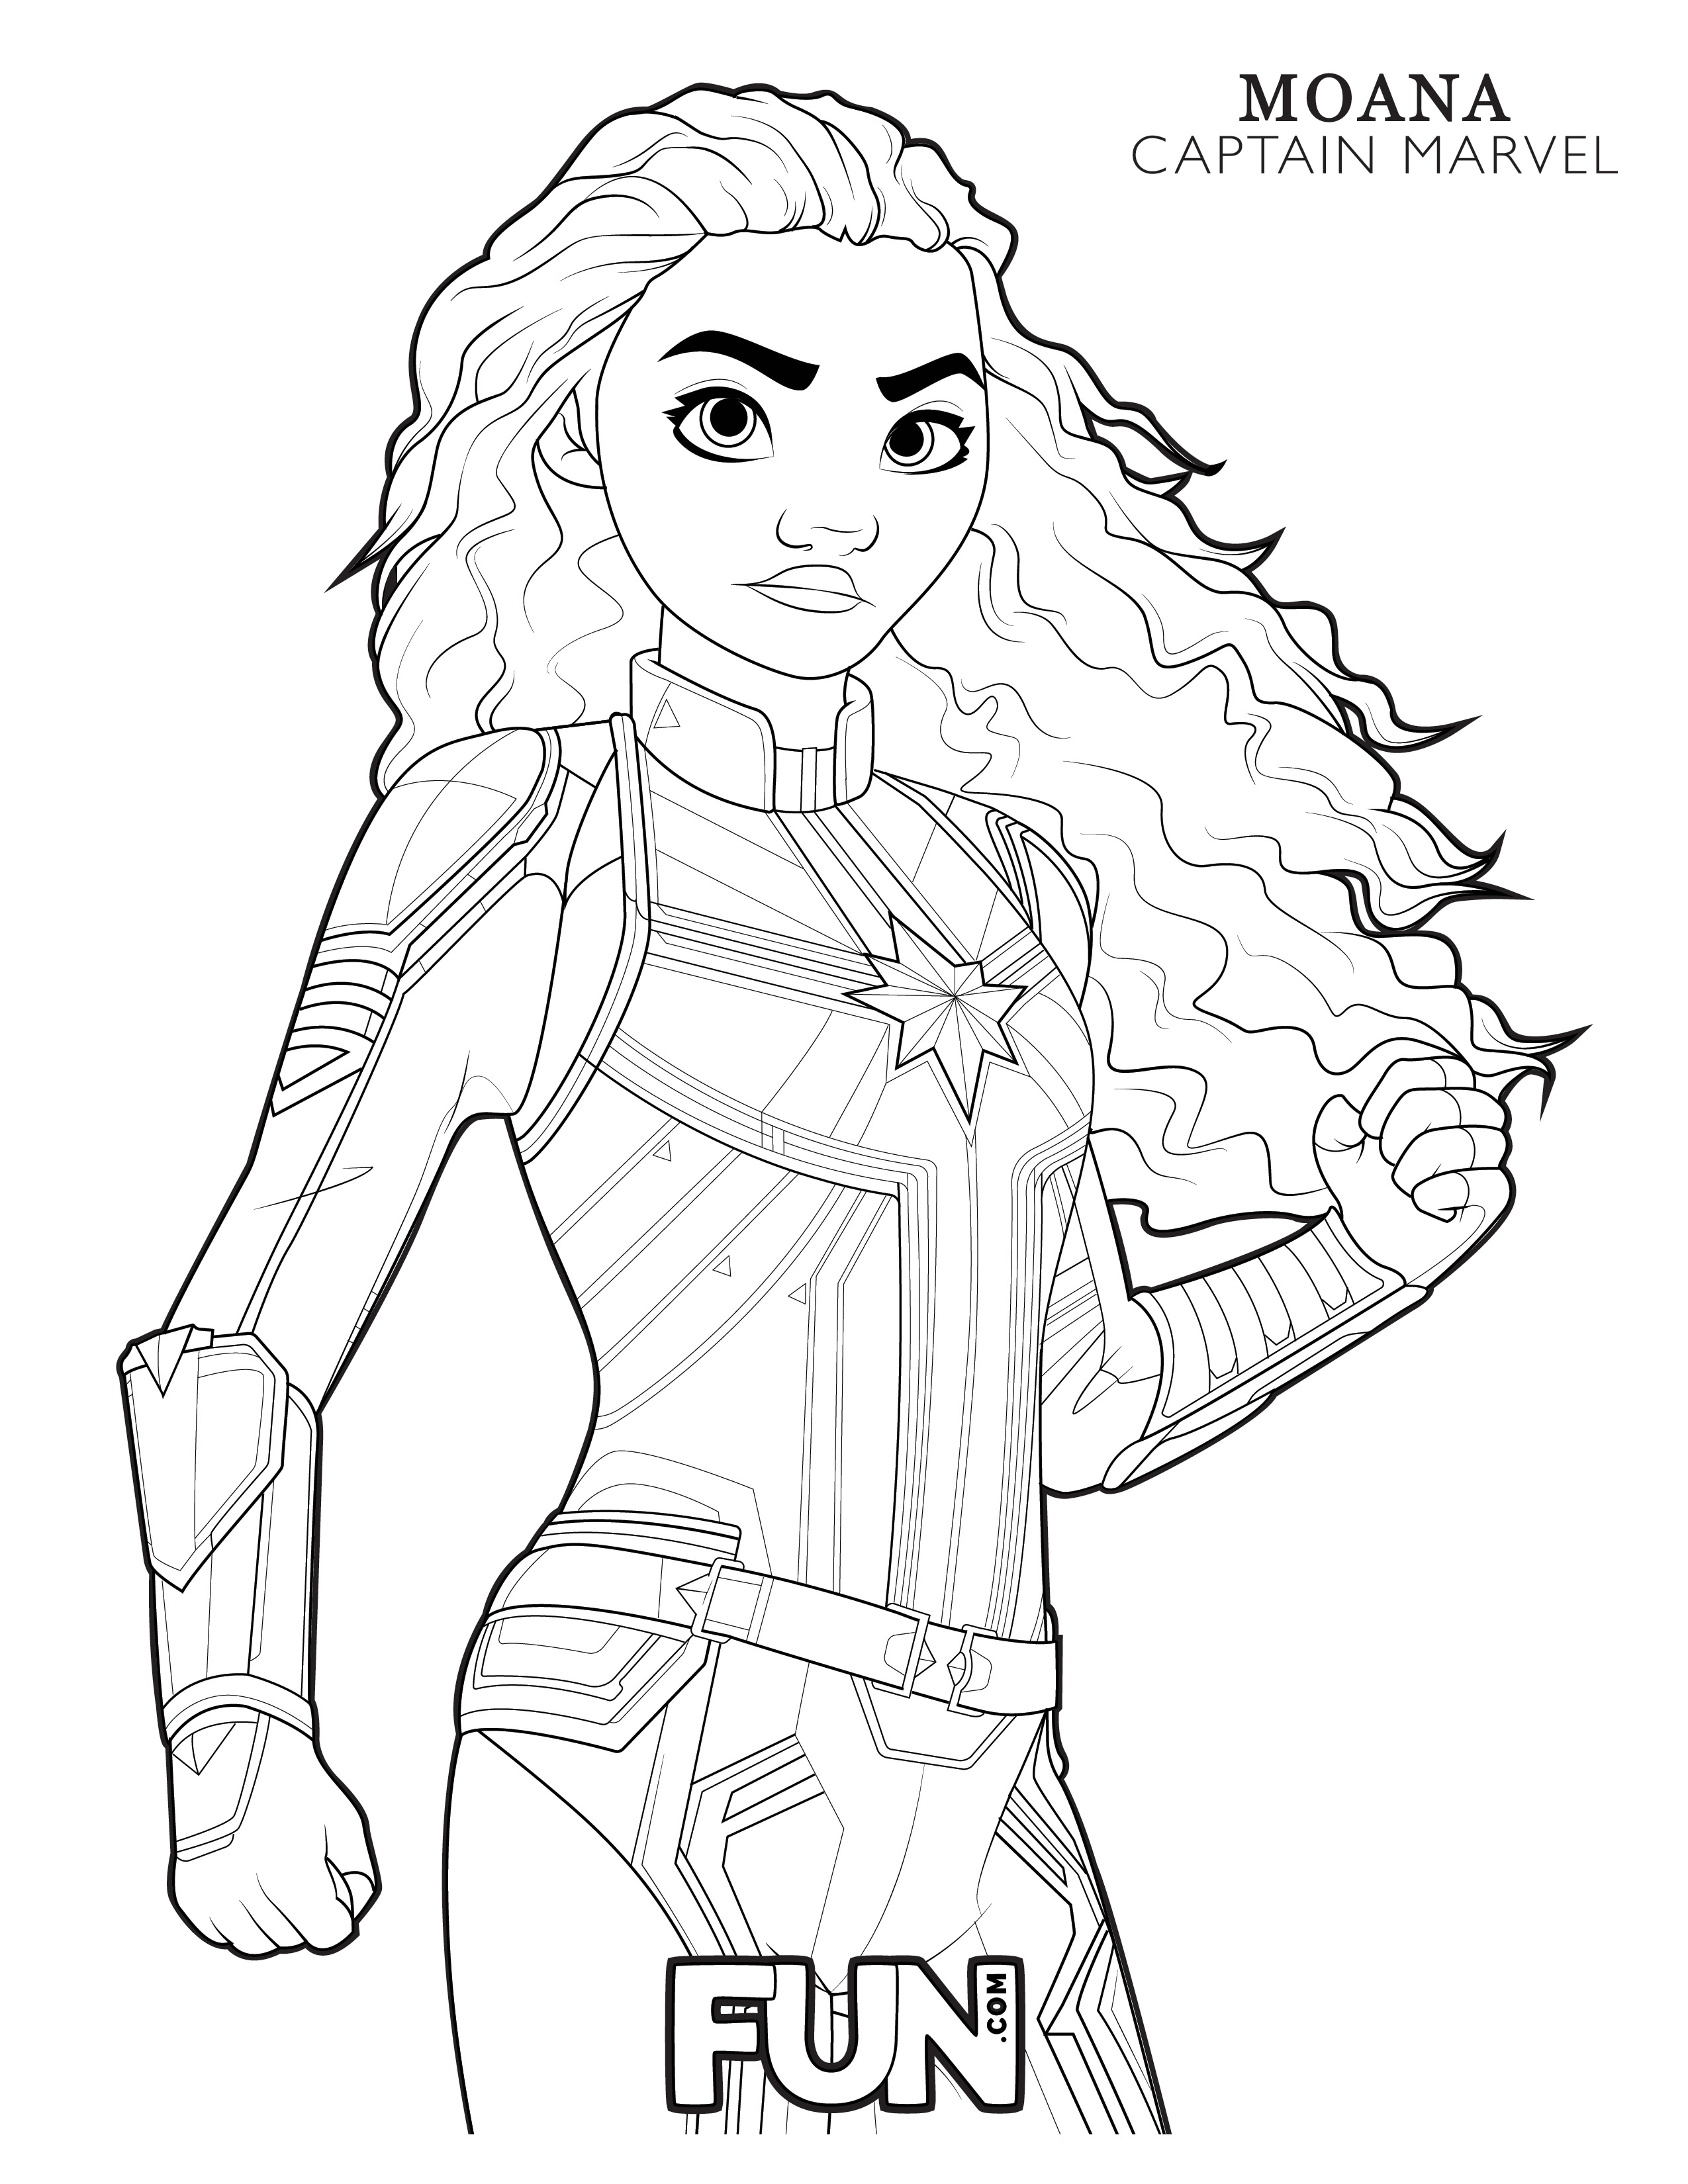 Moana Captain Marvel Coloring Page